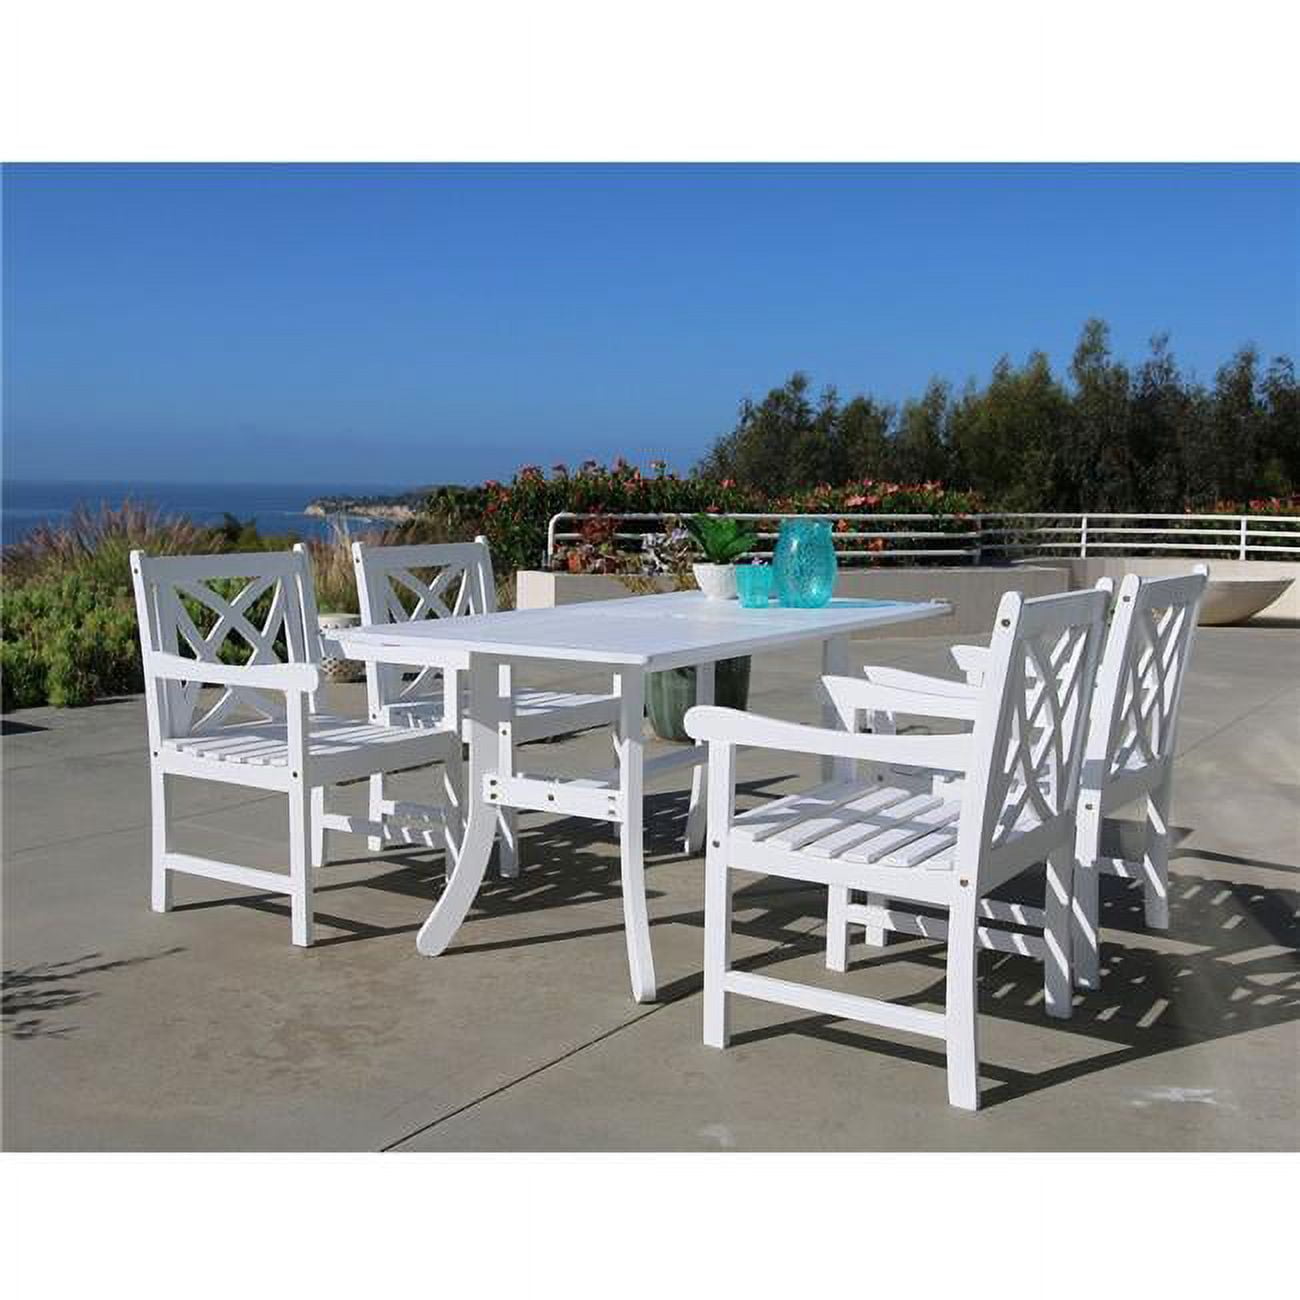 5-piece Wood Patio Dining Set In White - V1336set16